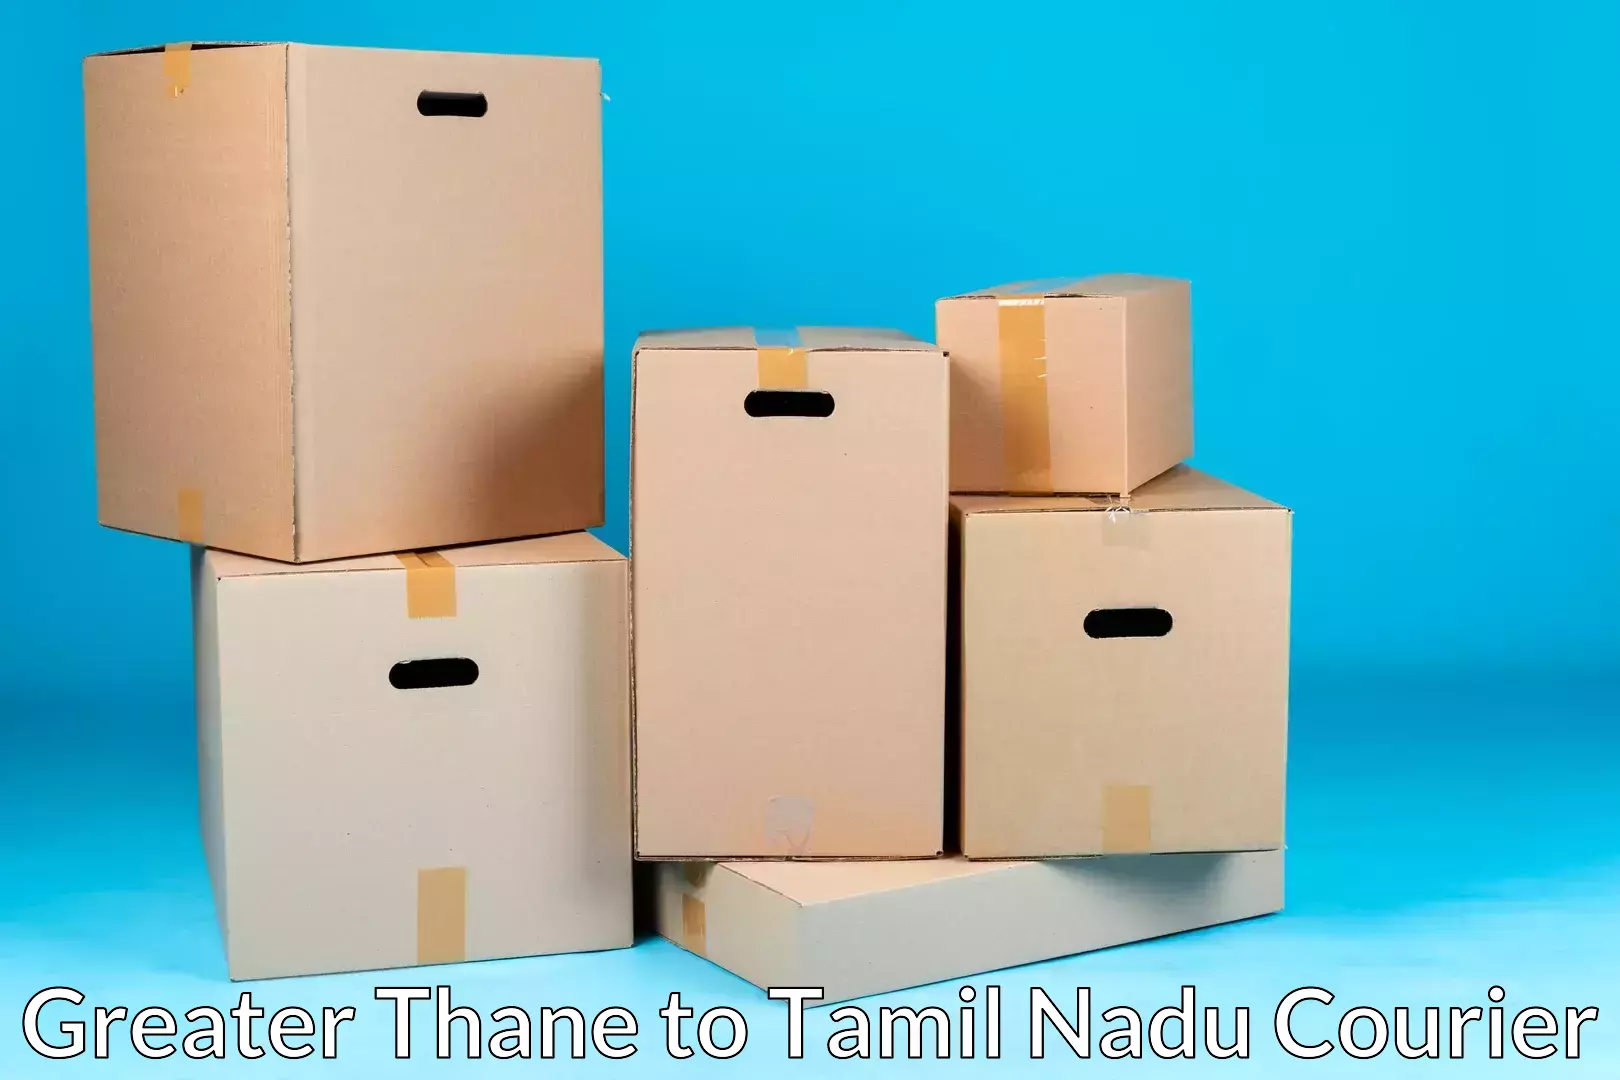 Stress-free moving in Greater Thane to Udagamandalam